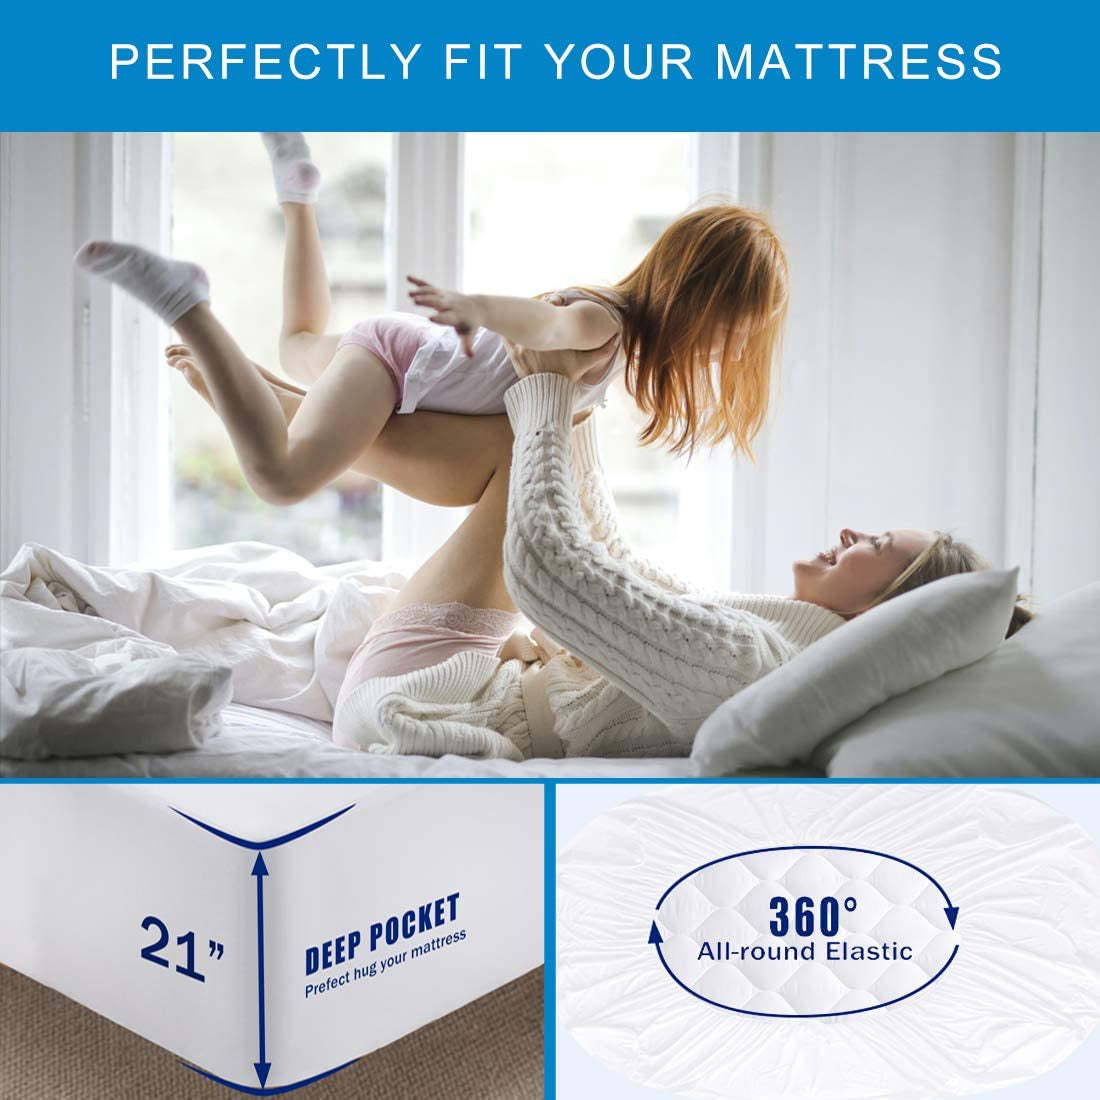 California King Size Quilted Fitted Waterproof Mattress Pad, Premium Hollow Material Filling Mattress Protector, Breathable, Quiet, Cooling, Machine-Washable Mattress Cover with 21” Deep Pocket